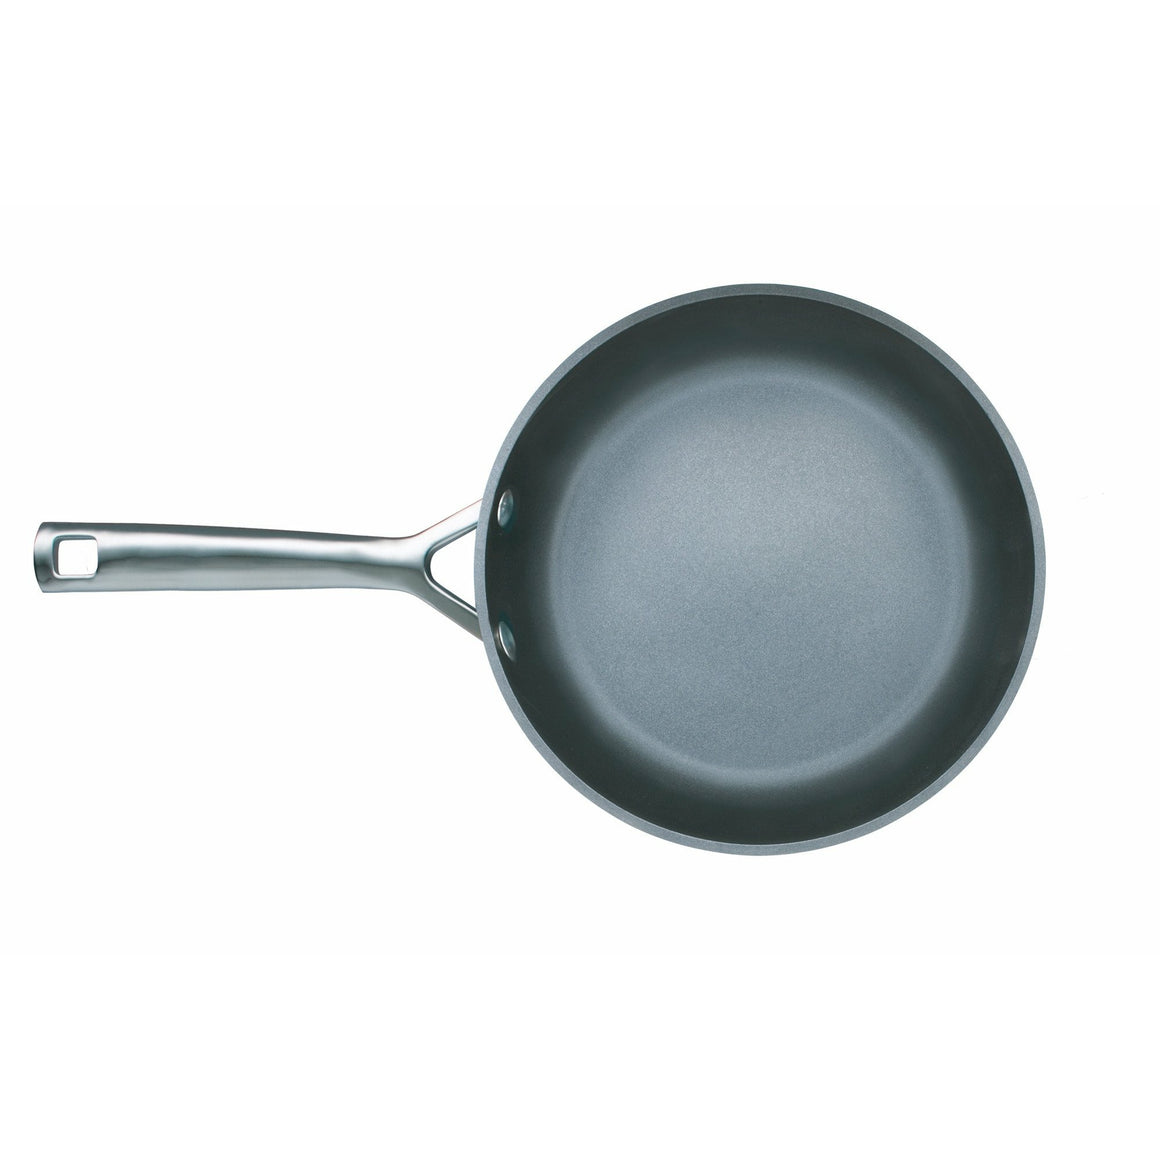 Le Creuset T.N.S Shallow Frying Pan - All Sizes